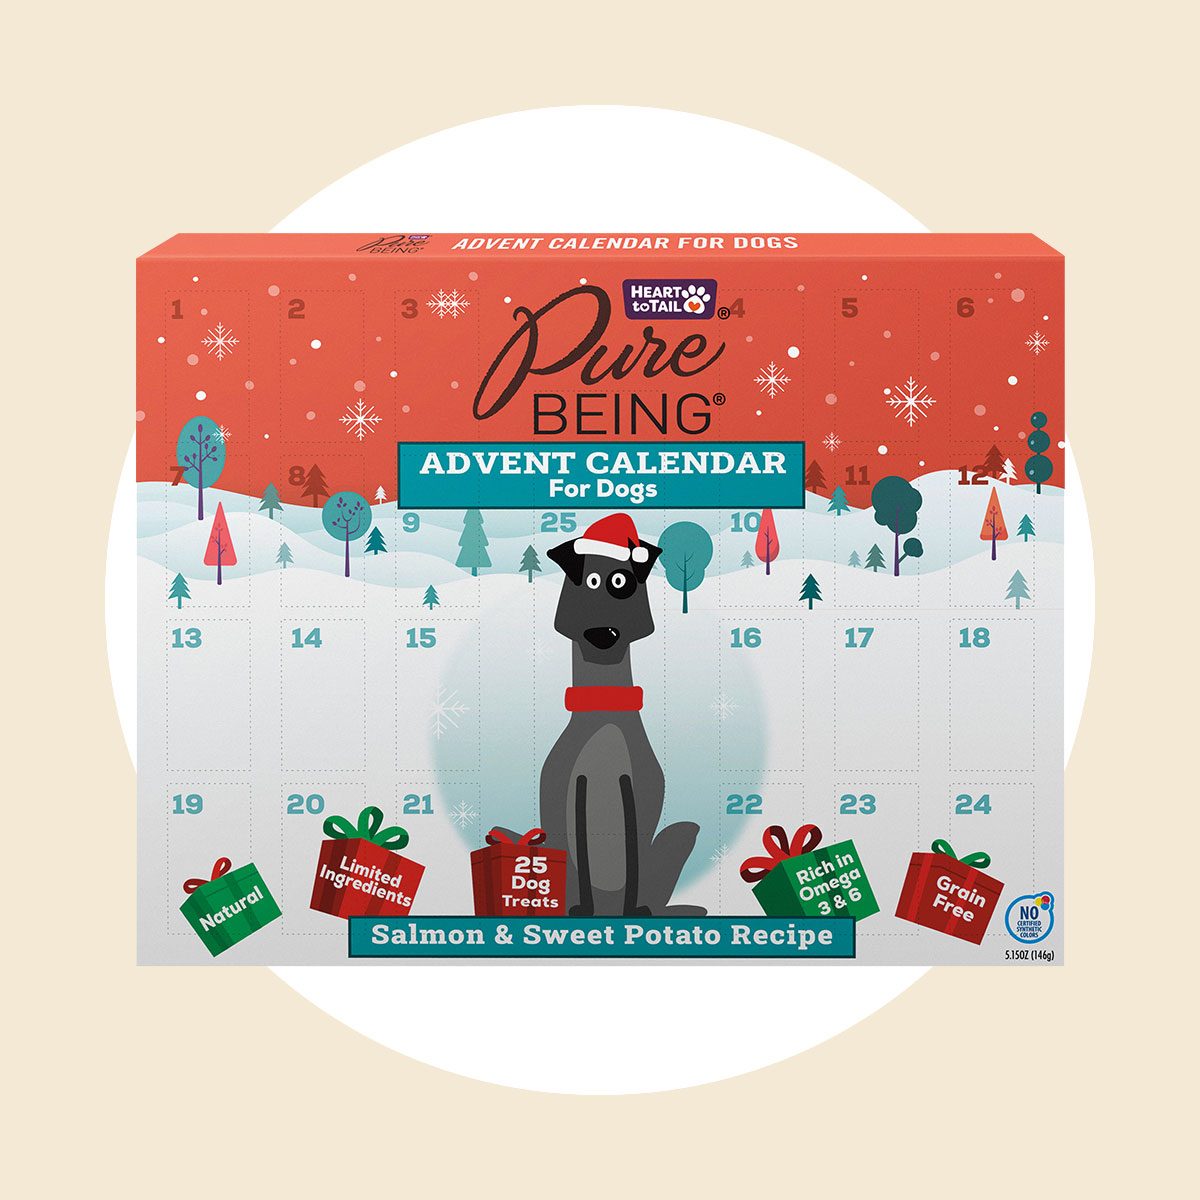 Aldi Advent Calendar Favorites Will Be in Stores on November 1